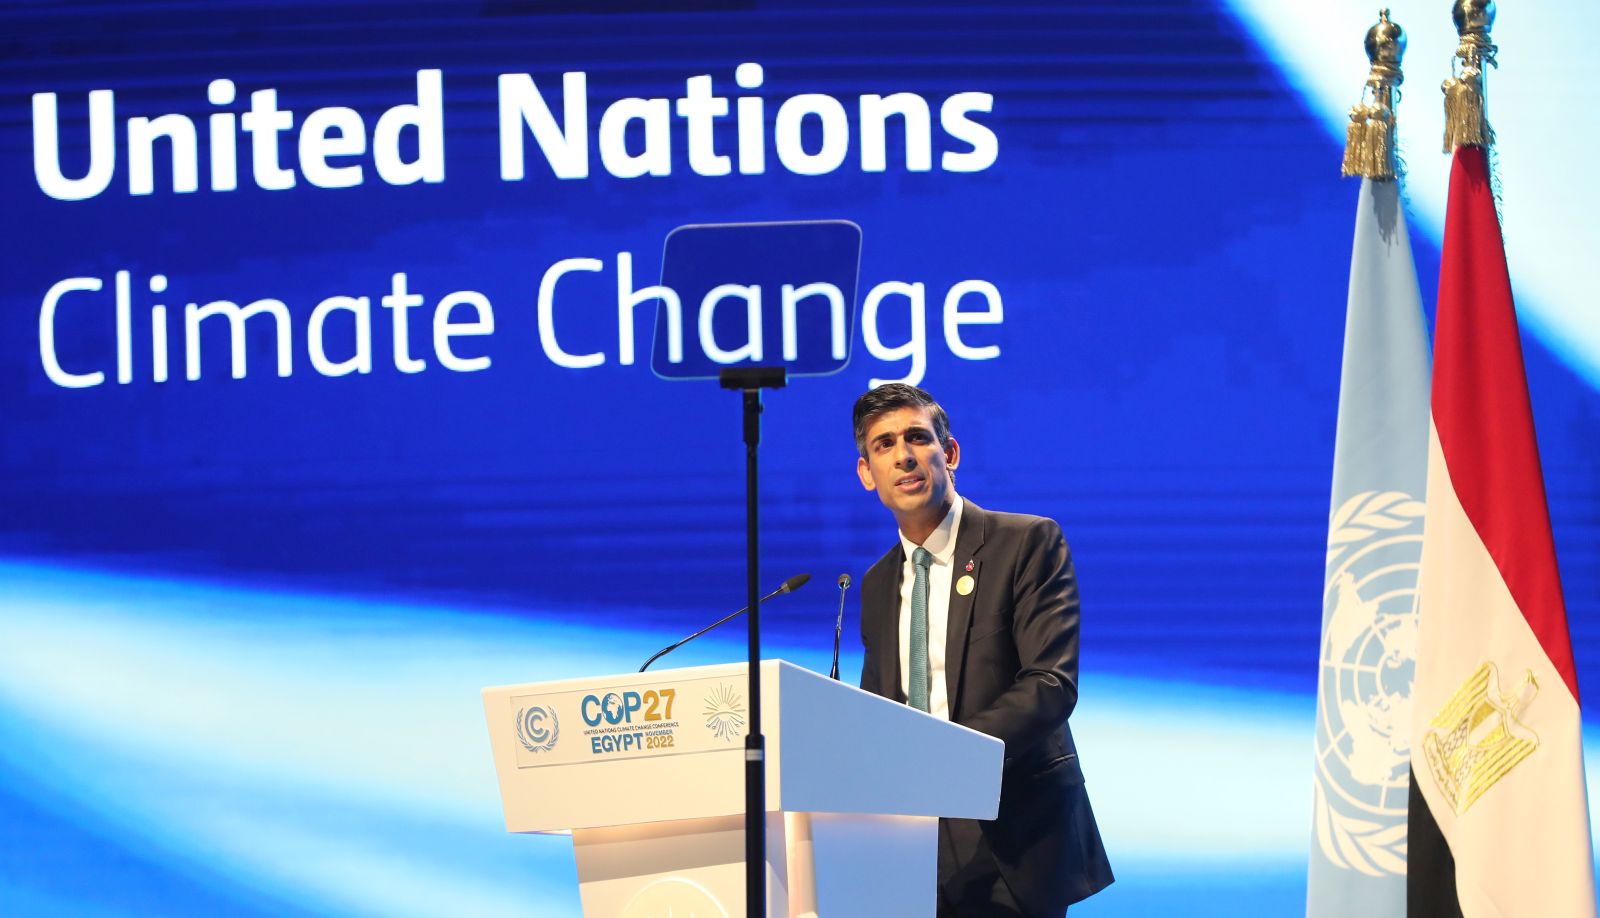 epa10292563 British Prime Minister Rishi Sunak speaks  during the 2022 United Nations Climate Change Conference (COP27),  in Sharm El-Sheikh, Egypt, 07 November 2022. The 2022 United Nations Climate Change Conference (COP27), runs from 06-18 November, and is expected to host one of the largest number of participants in the annual global climate conference as over 40,000 estimated attendees, including heads of states and governments, civil society, media and other relevant stakeholders will attend. The events will include a Climate Implementation Summit, thematic days, flagship initiatives, and Green Zone activities engaging with climate and other global challenges.  EPA/SEDAT SUNA